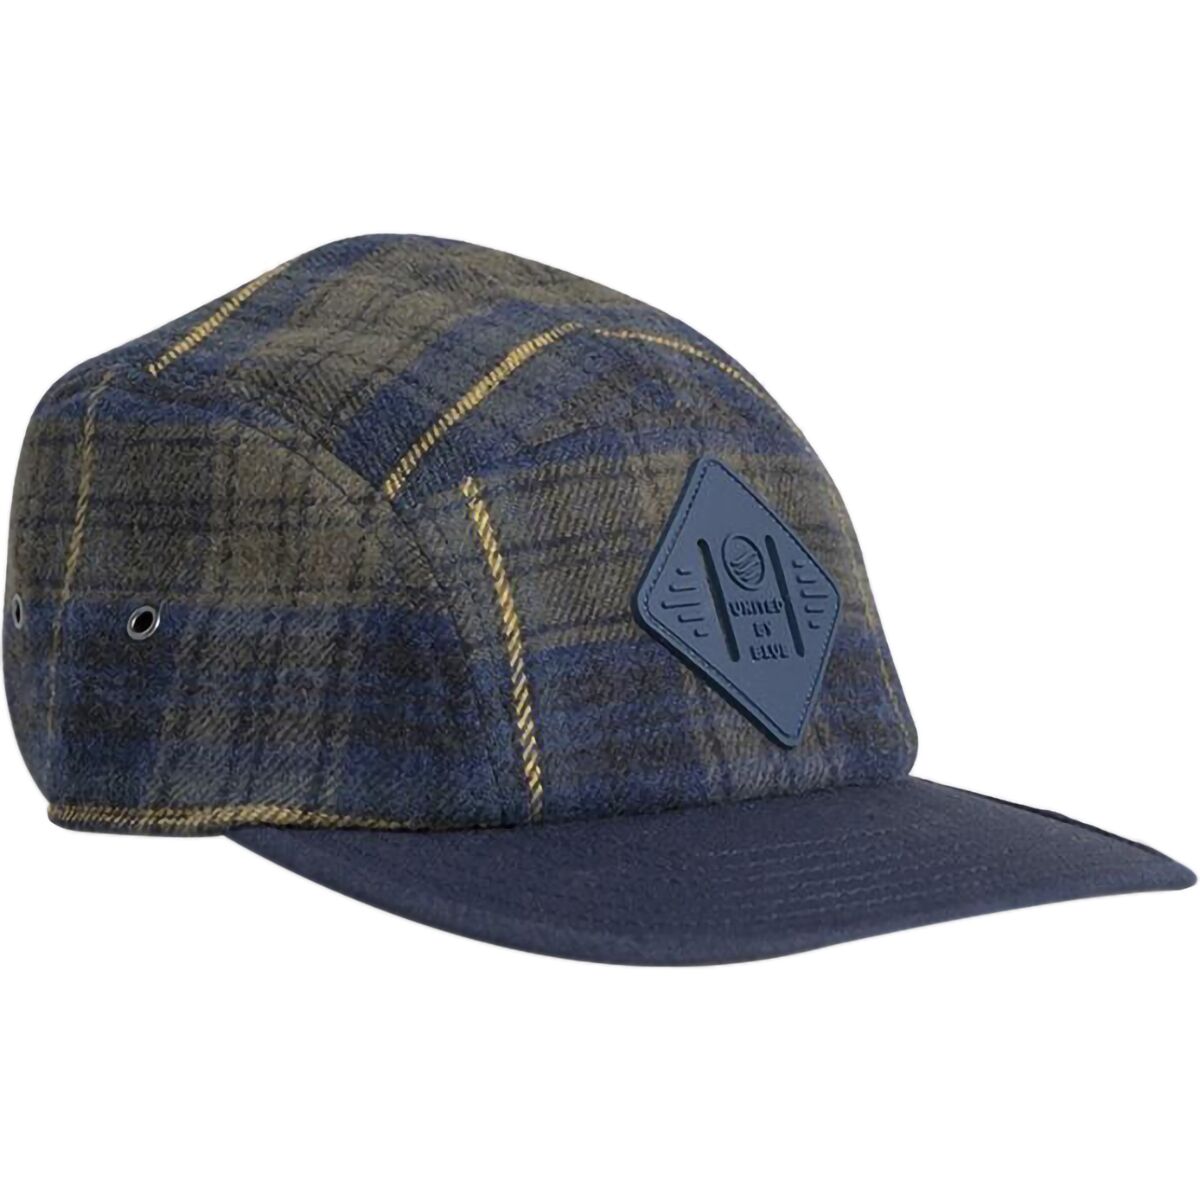 United by Blue Flannel 5-Panel Hat